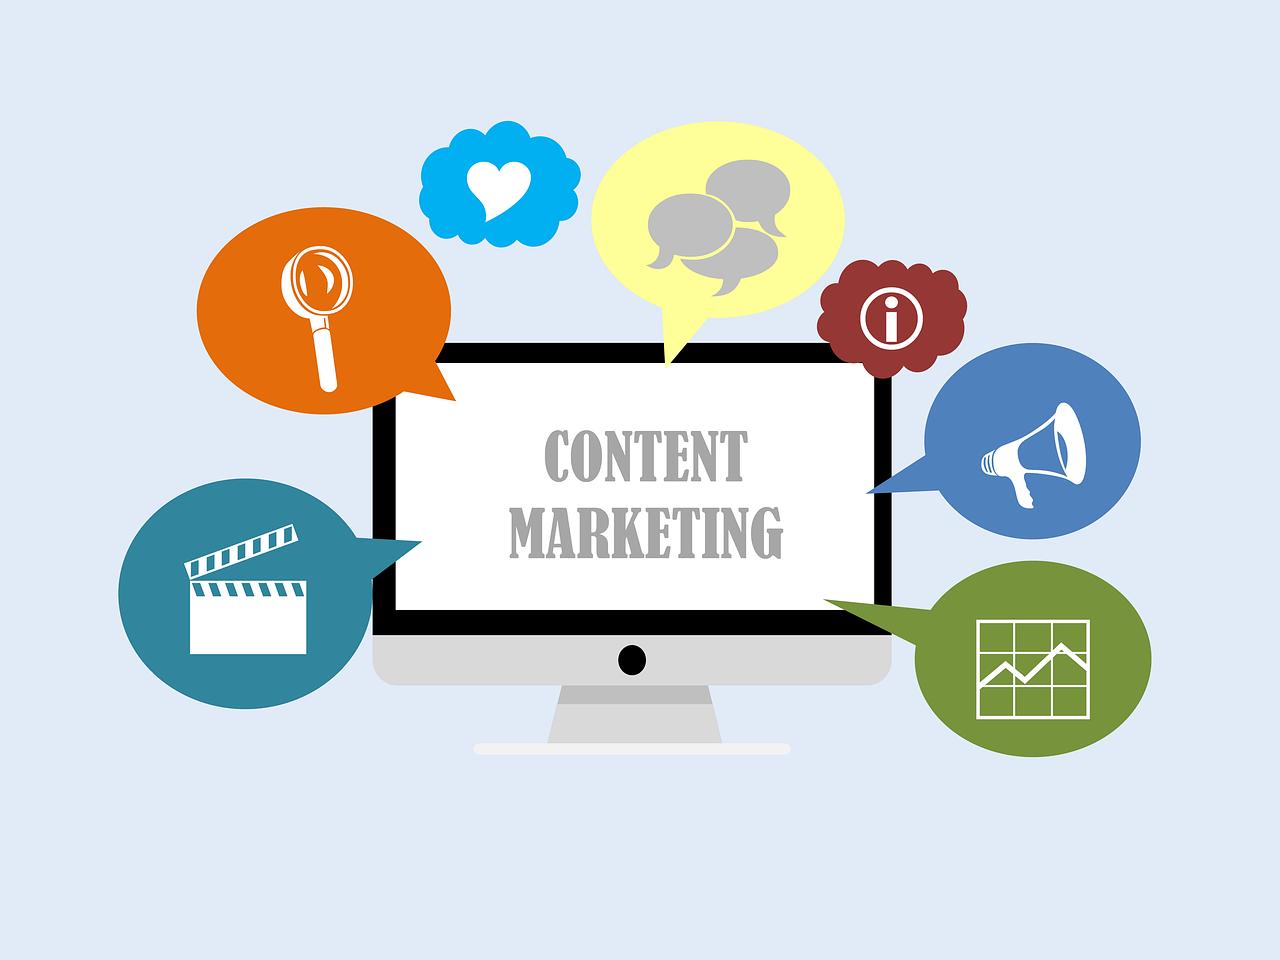 Content marketing as a powerful small business tip